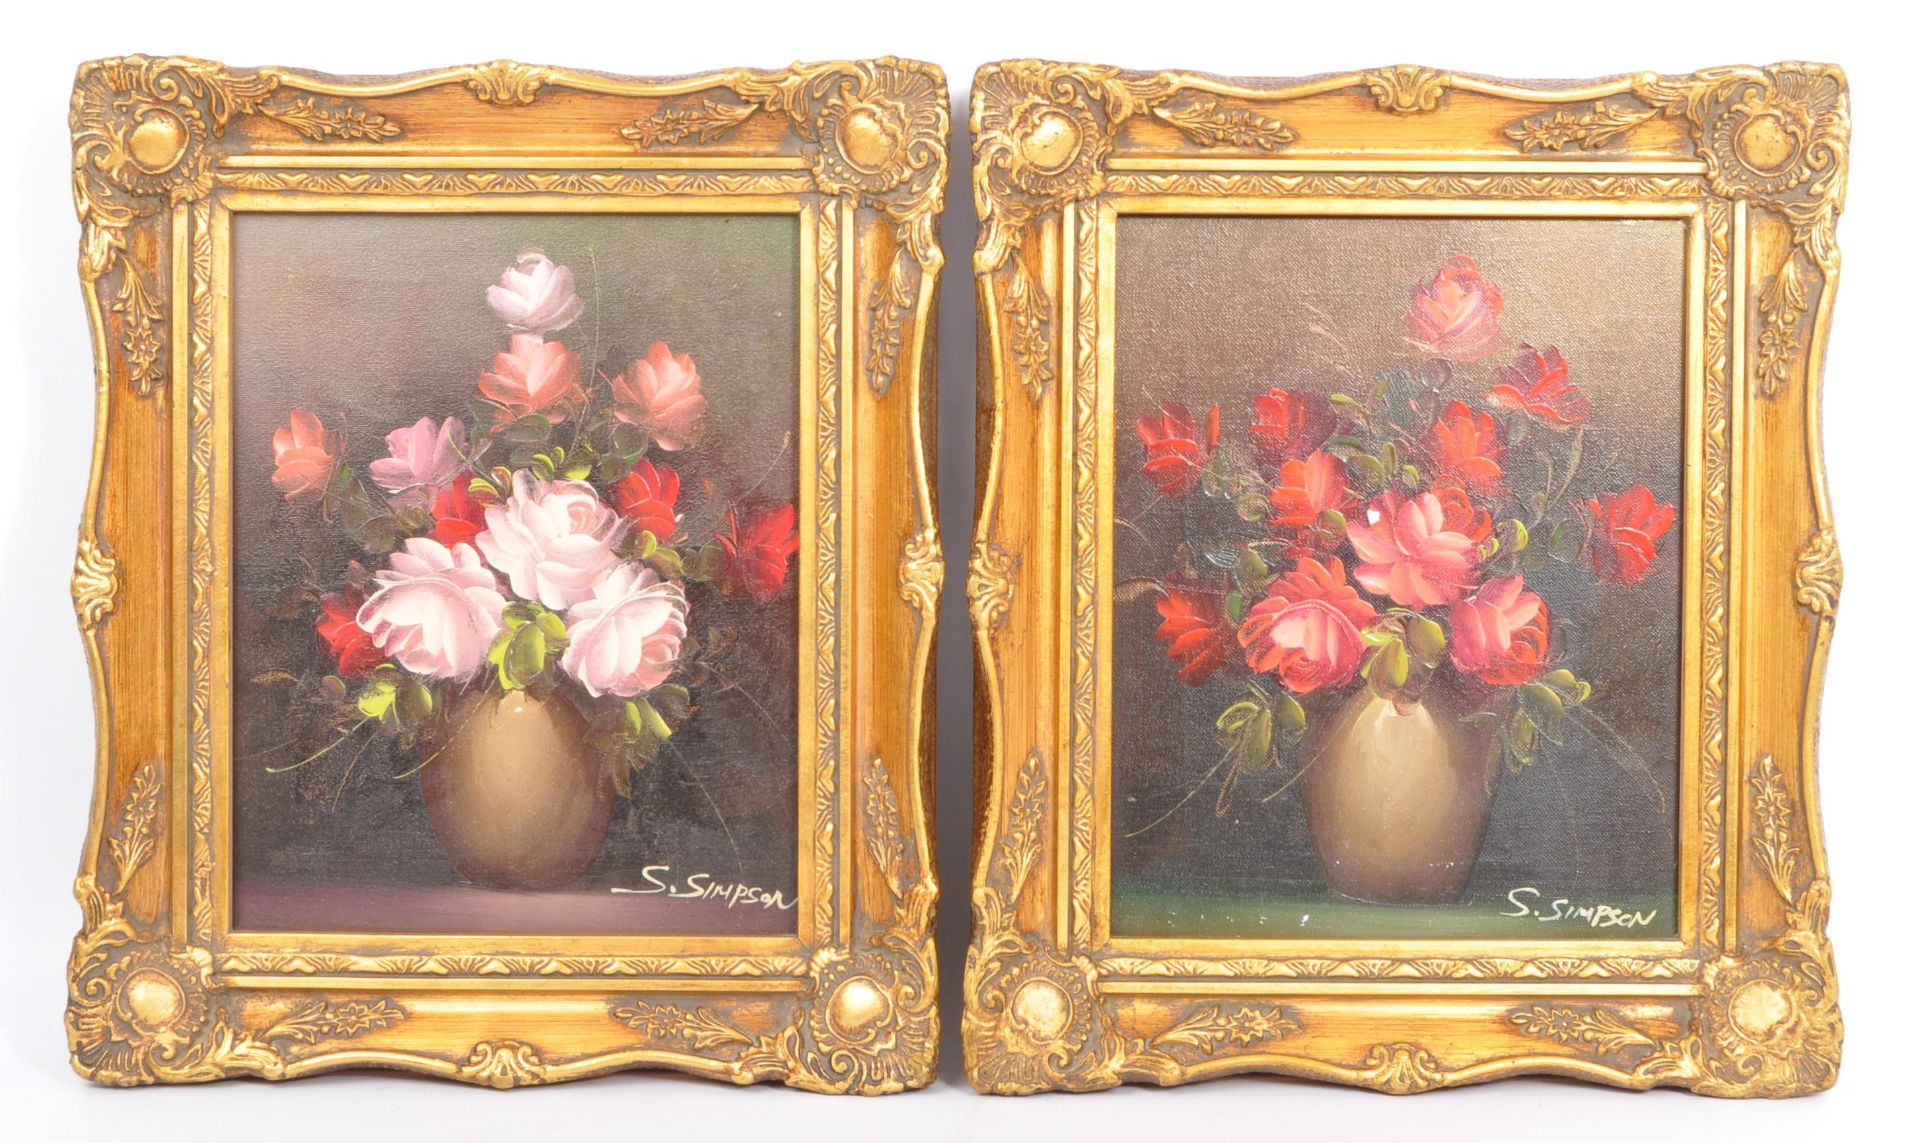 PAIR OF VINTAGE OIL ON CANVAS FLORAL PAINTINGS BY S.SIMPSON